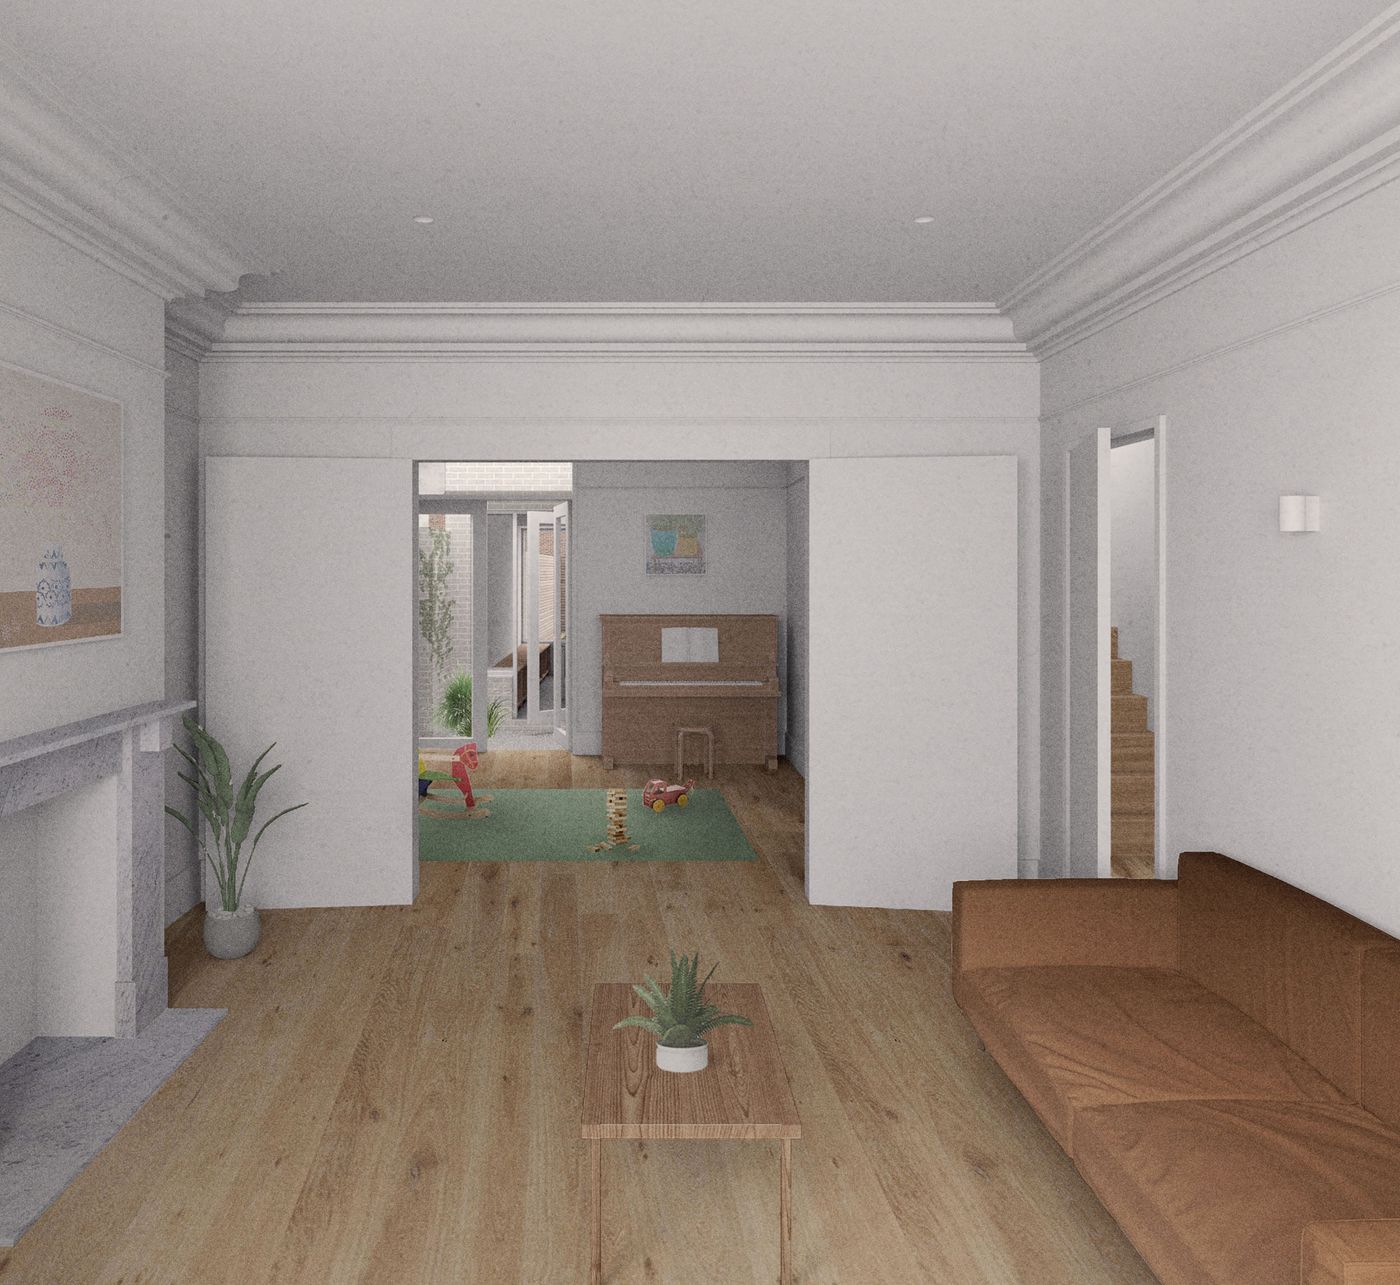 Interior view of the proposed refurbished living room for From Works' project in Bristol.